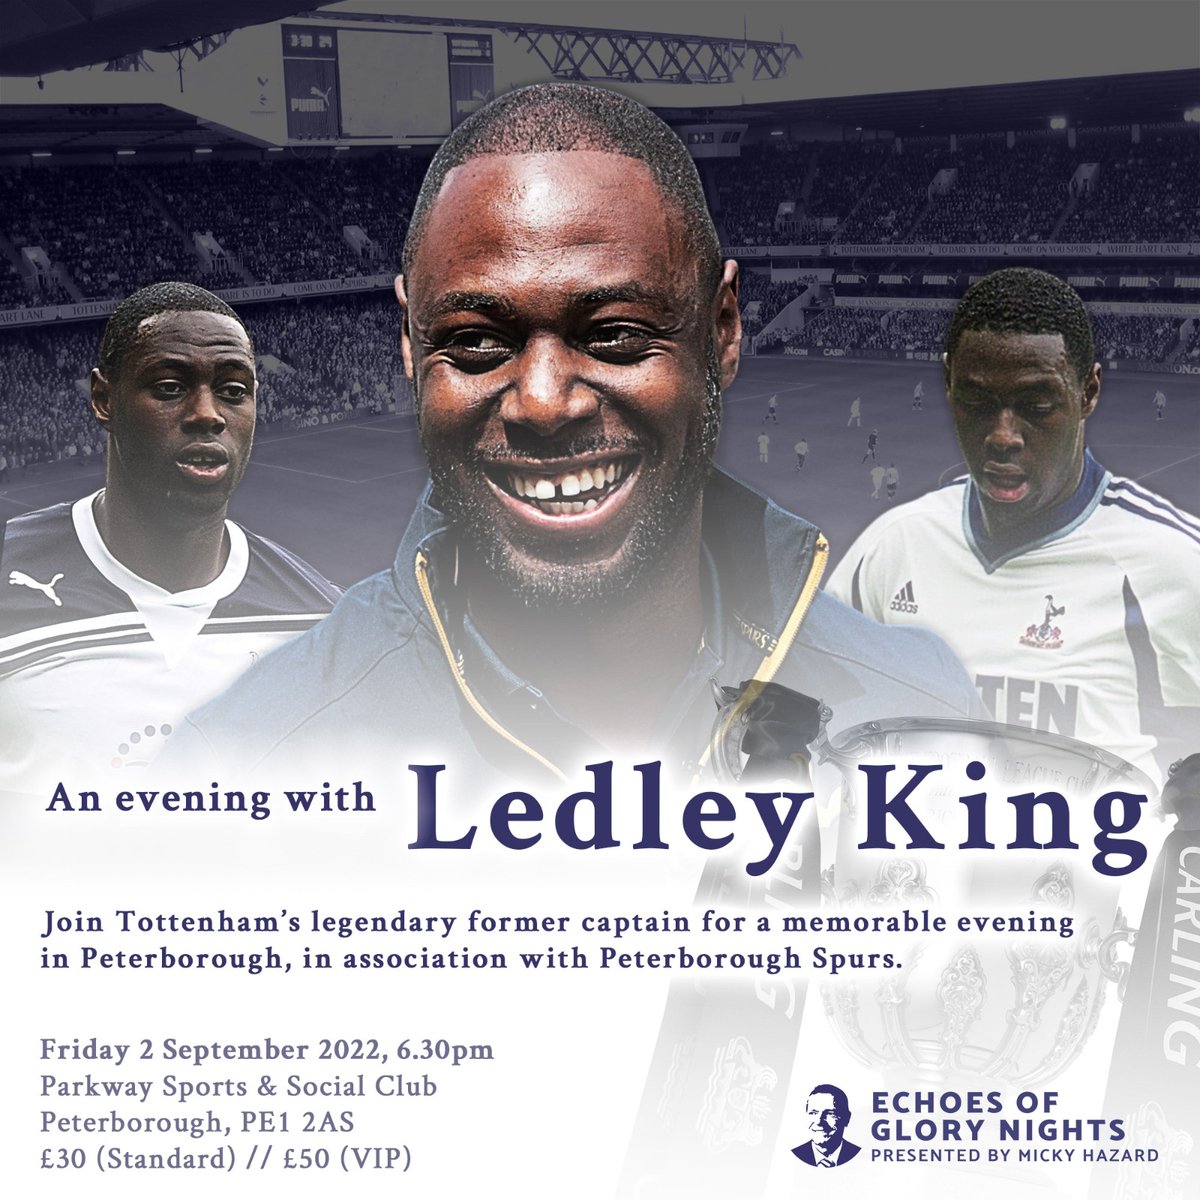 It's official @LedleyKing is coming to #PeterboroughSpurs  VIP & Standard tickets available now, with @1MickyHazard as compère Friday 2nd Sept, message me for tickets #COYS #PeterboroughSpurs #Legends #LegendsOfTheLane #tottenhamhotspurs #Spurs